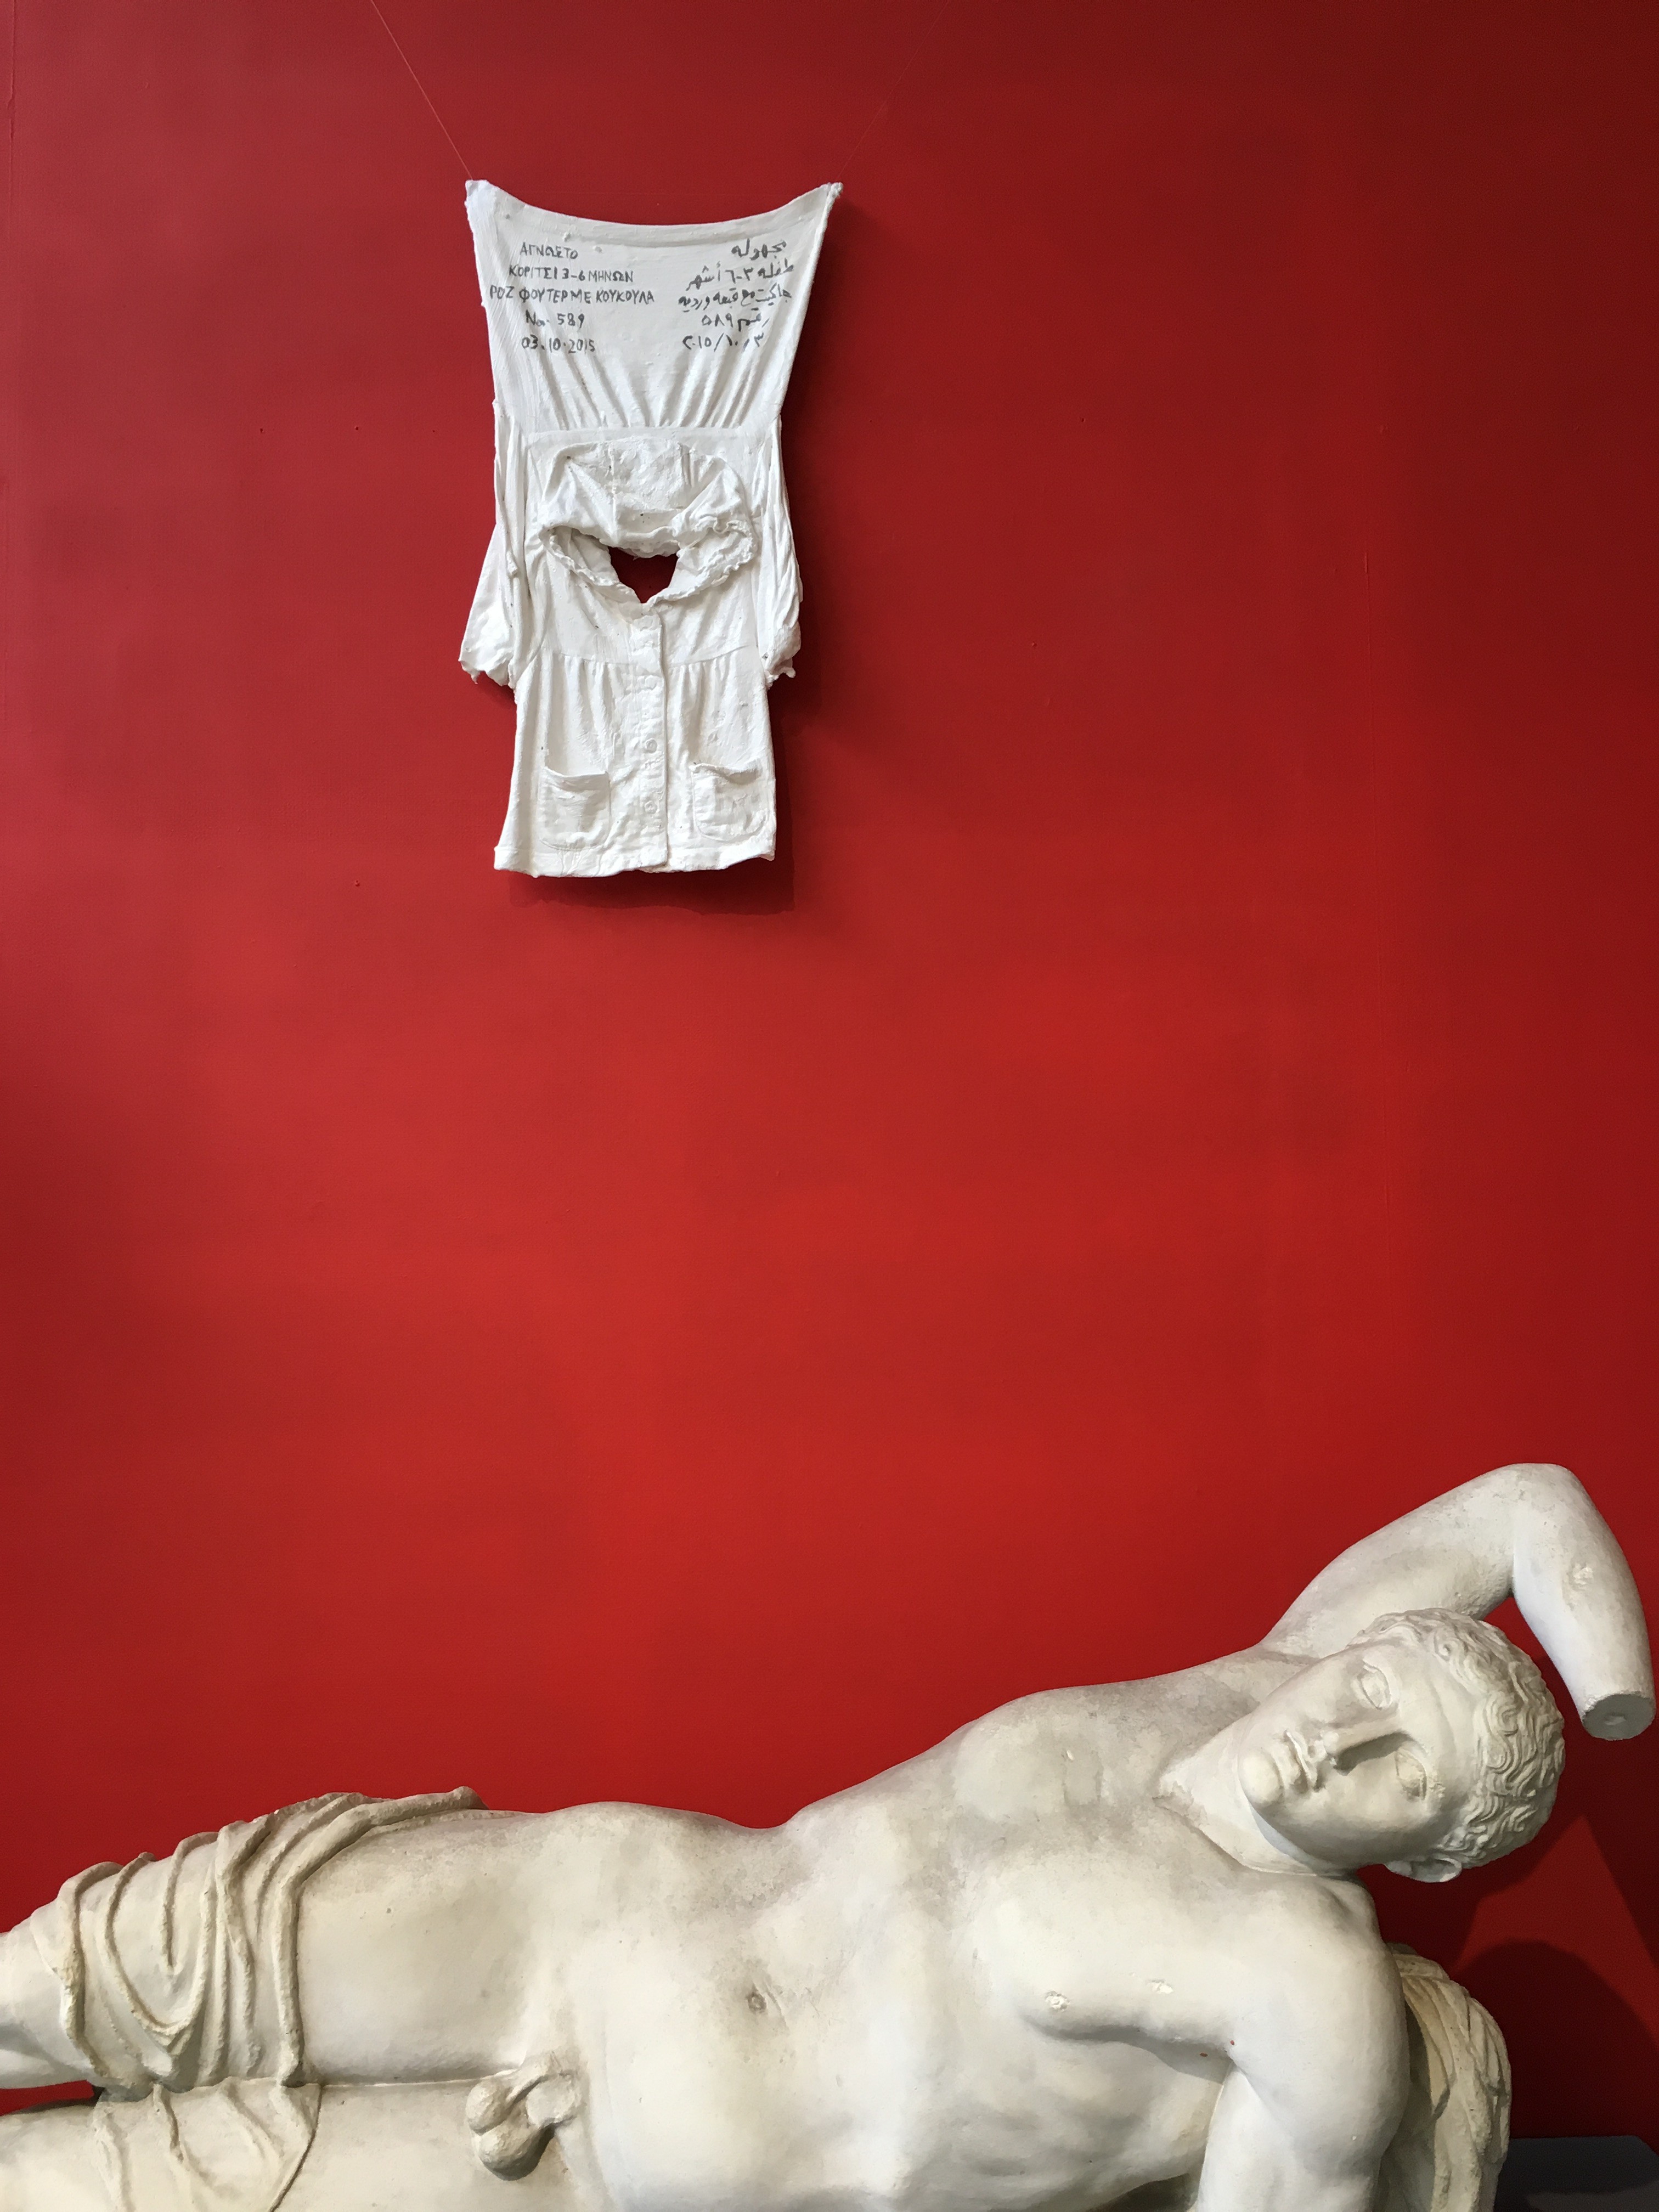 the same sculpture of a reclining naked young man, with plaster clothes hanging above